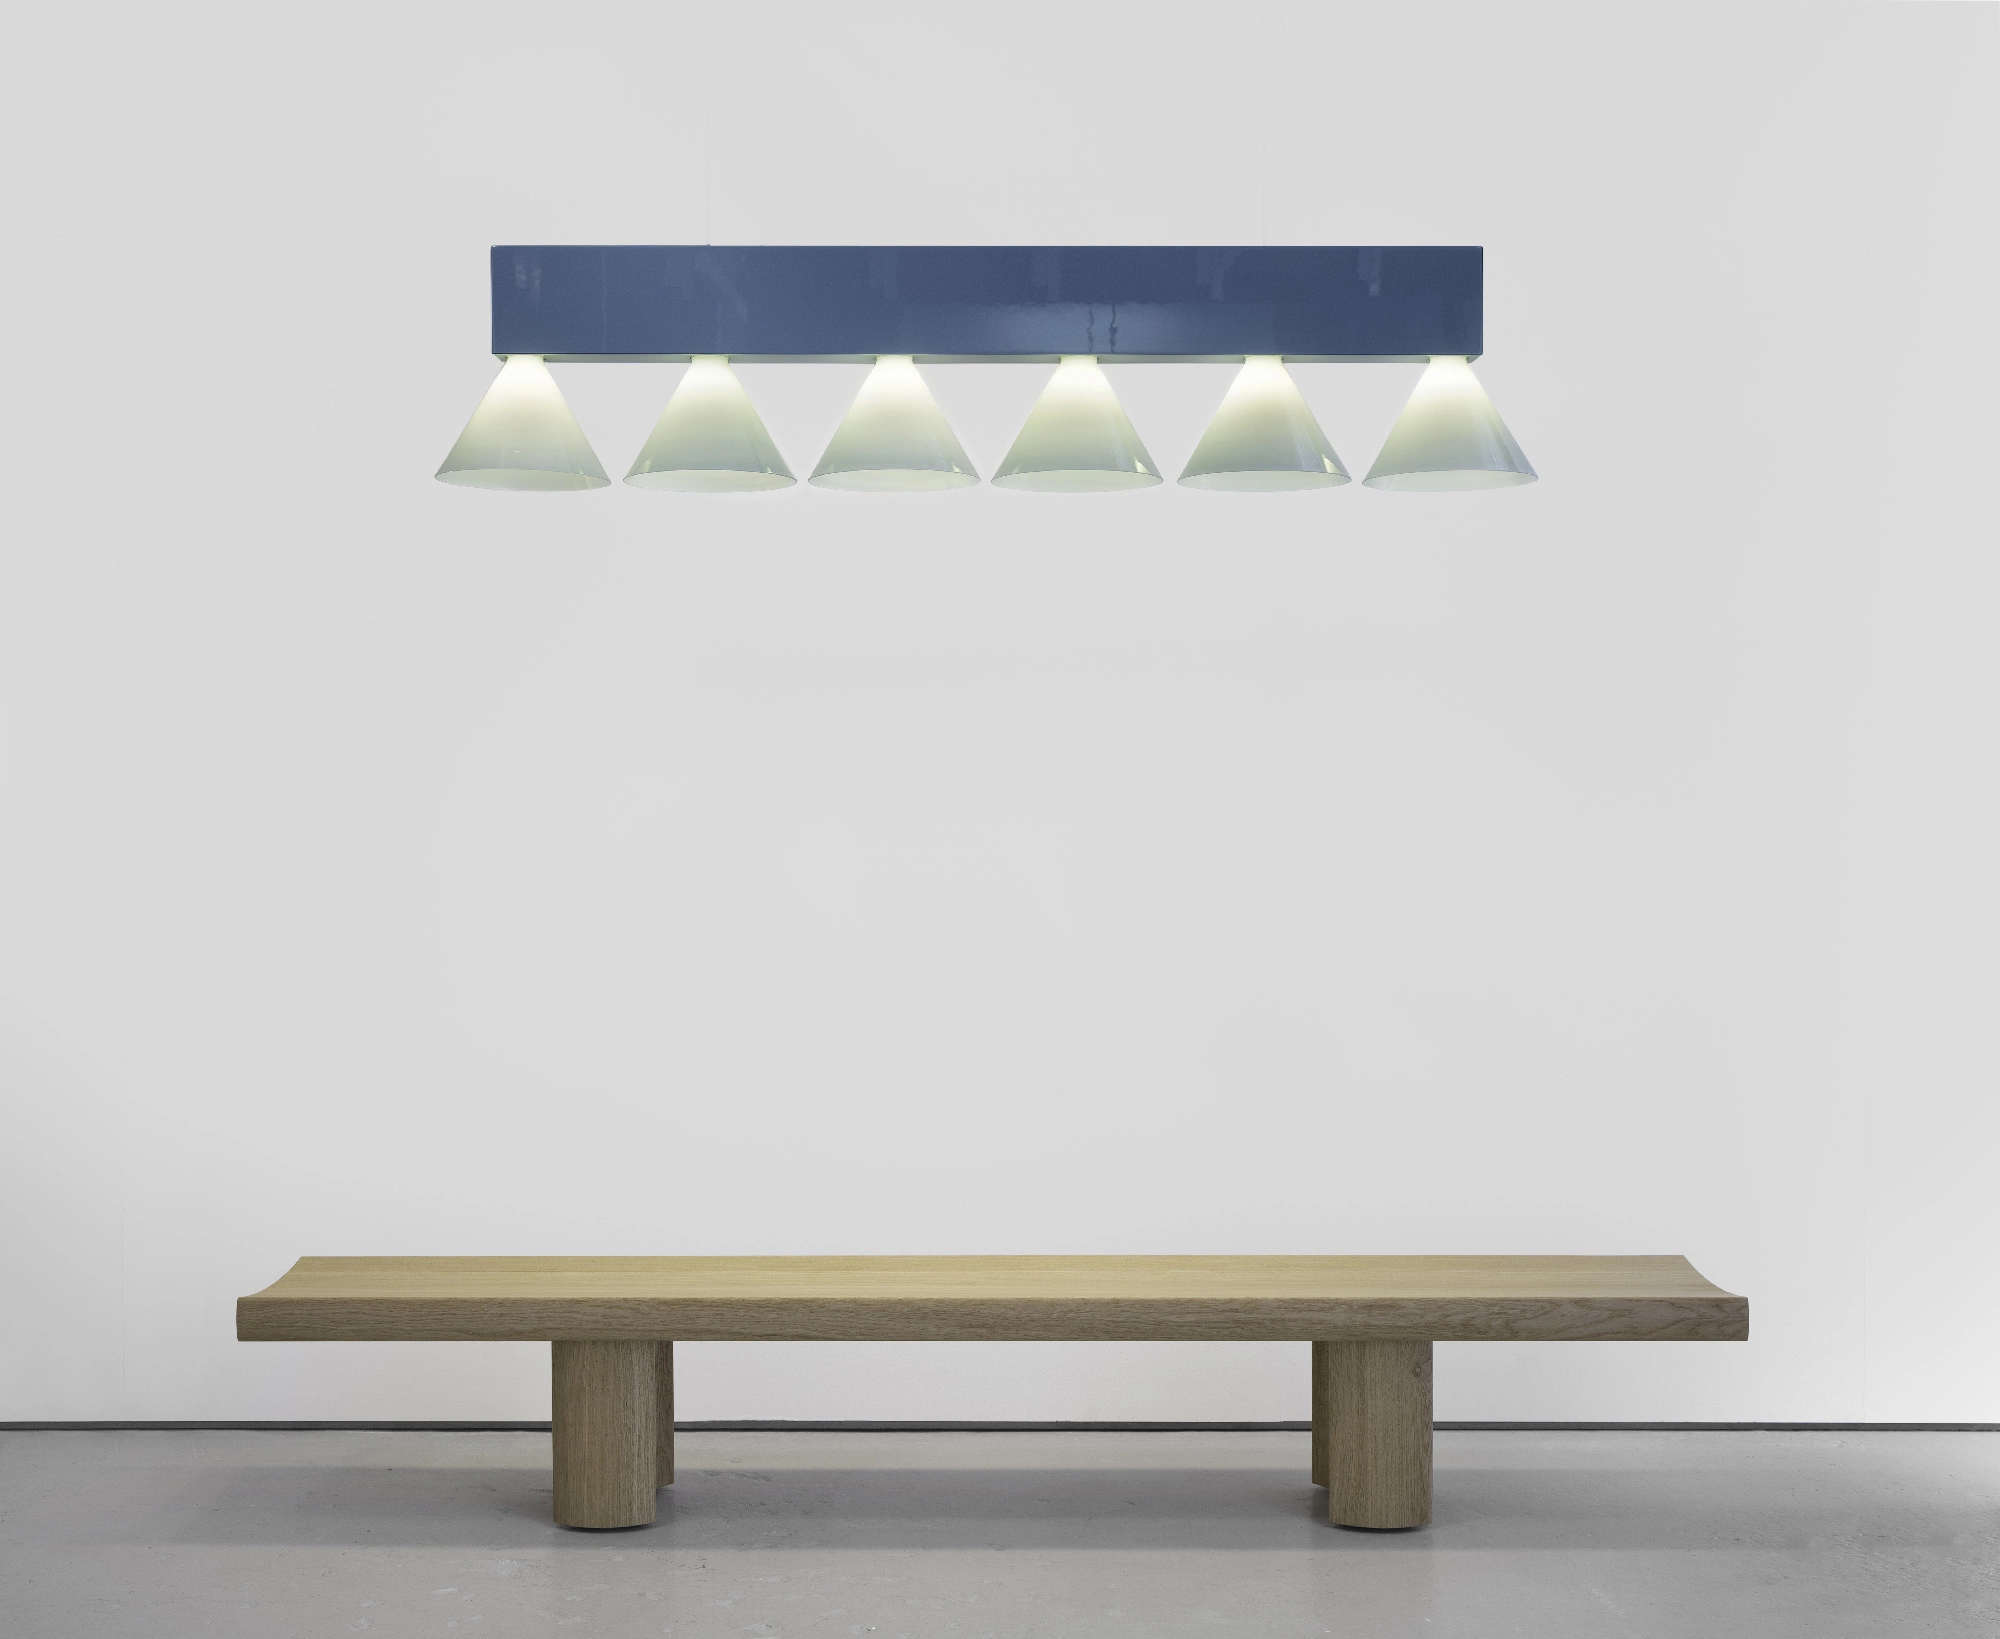 Hakone Bench - Edward and Jay Barber and Osgerby - Bench - Galerie kreo